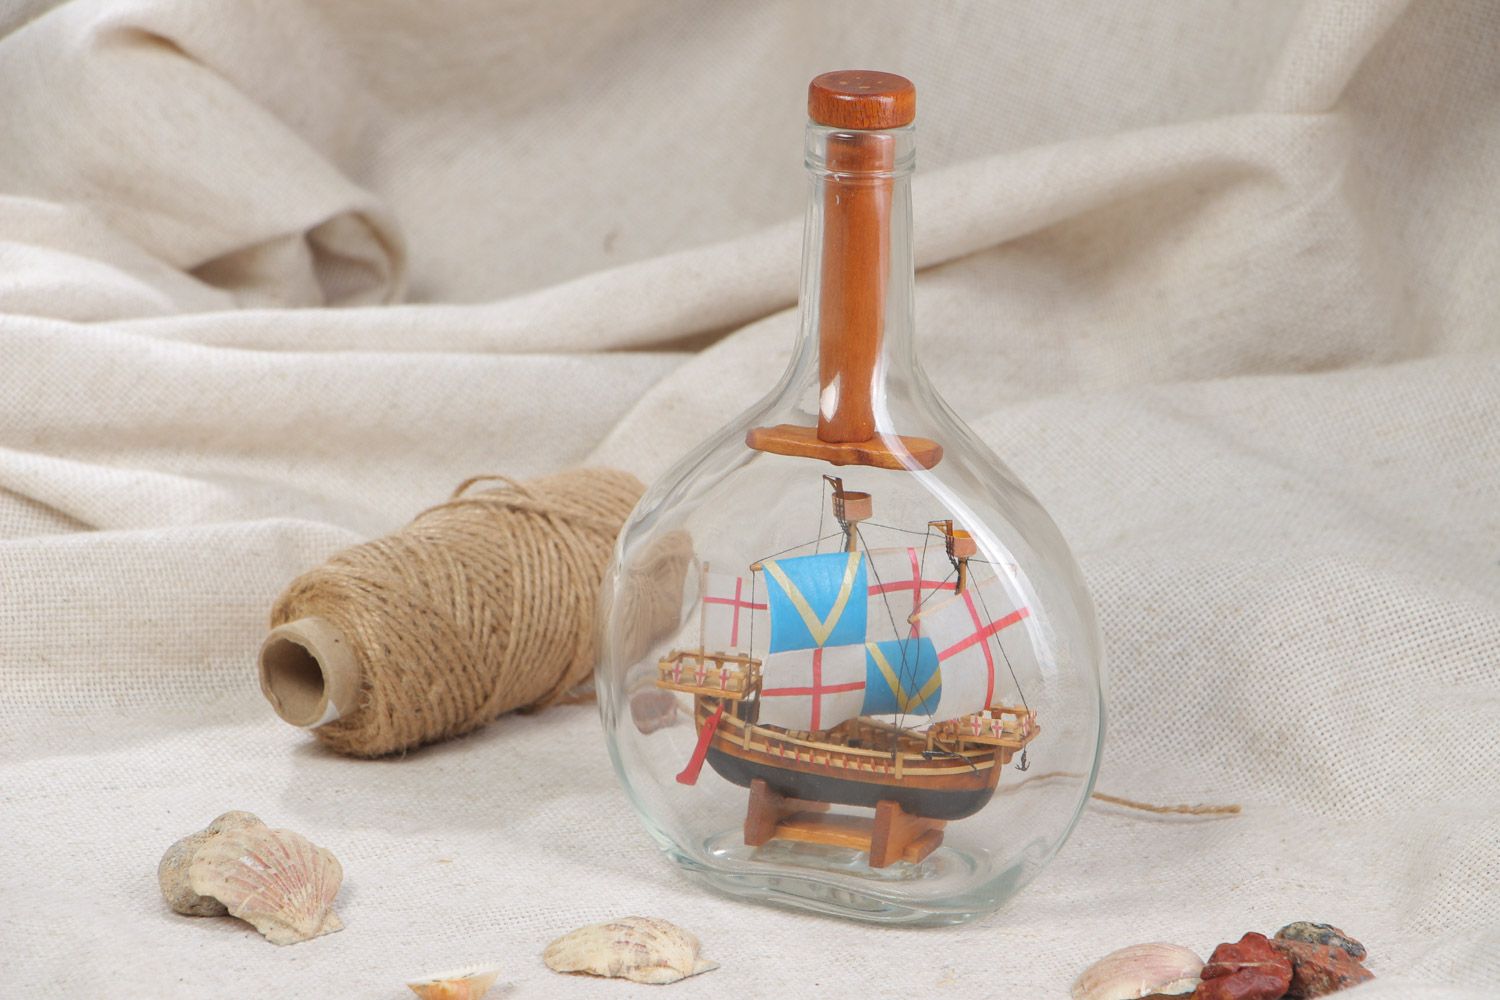 Magnificent handmade glass bottle with small boat inside interior decoration photo 1